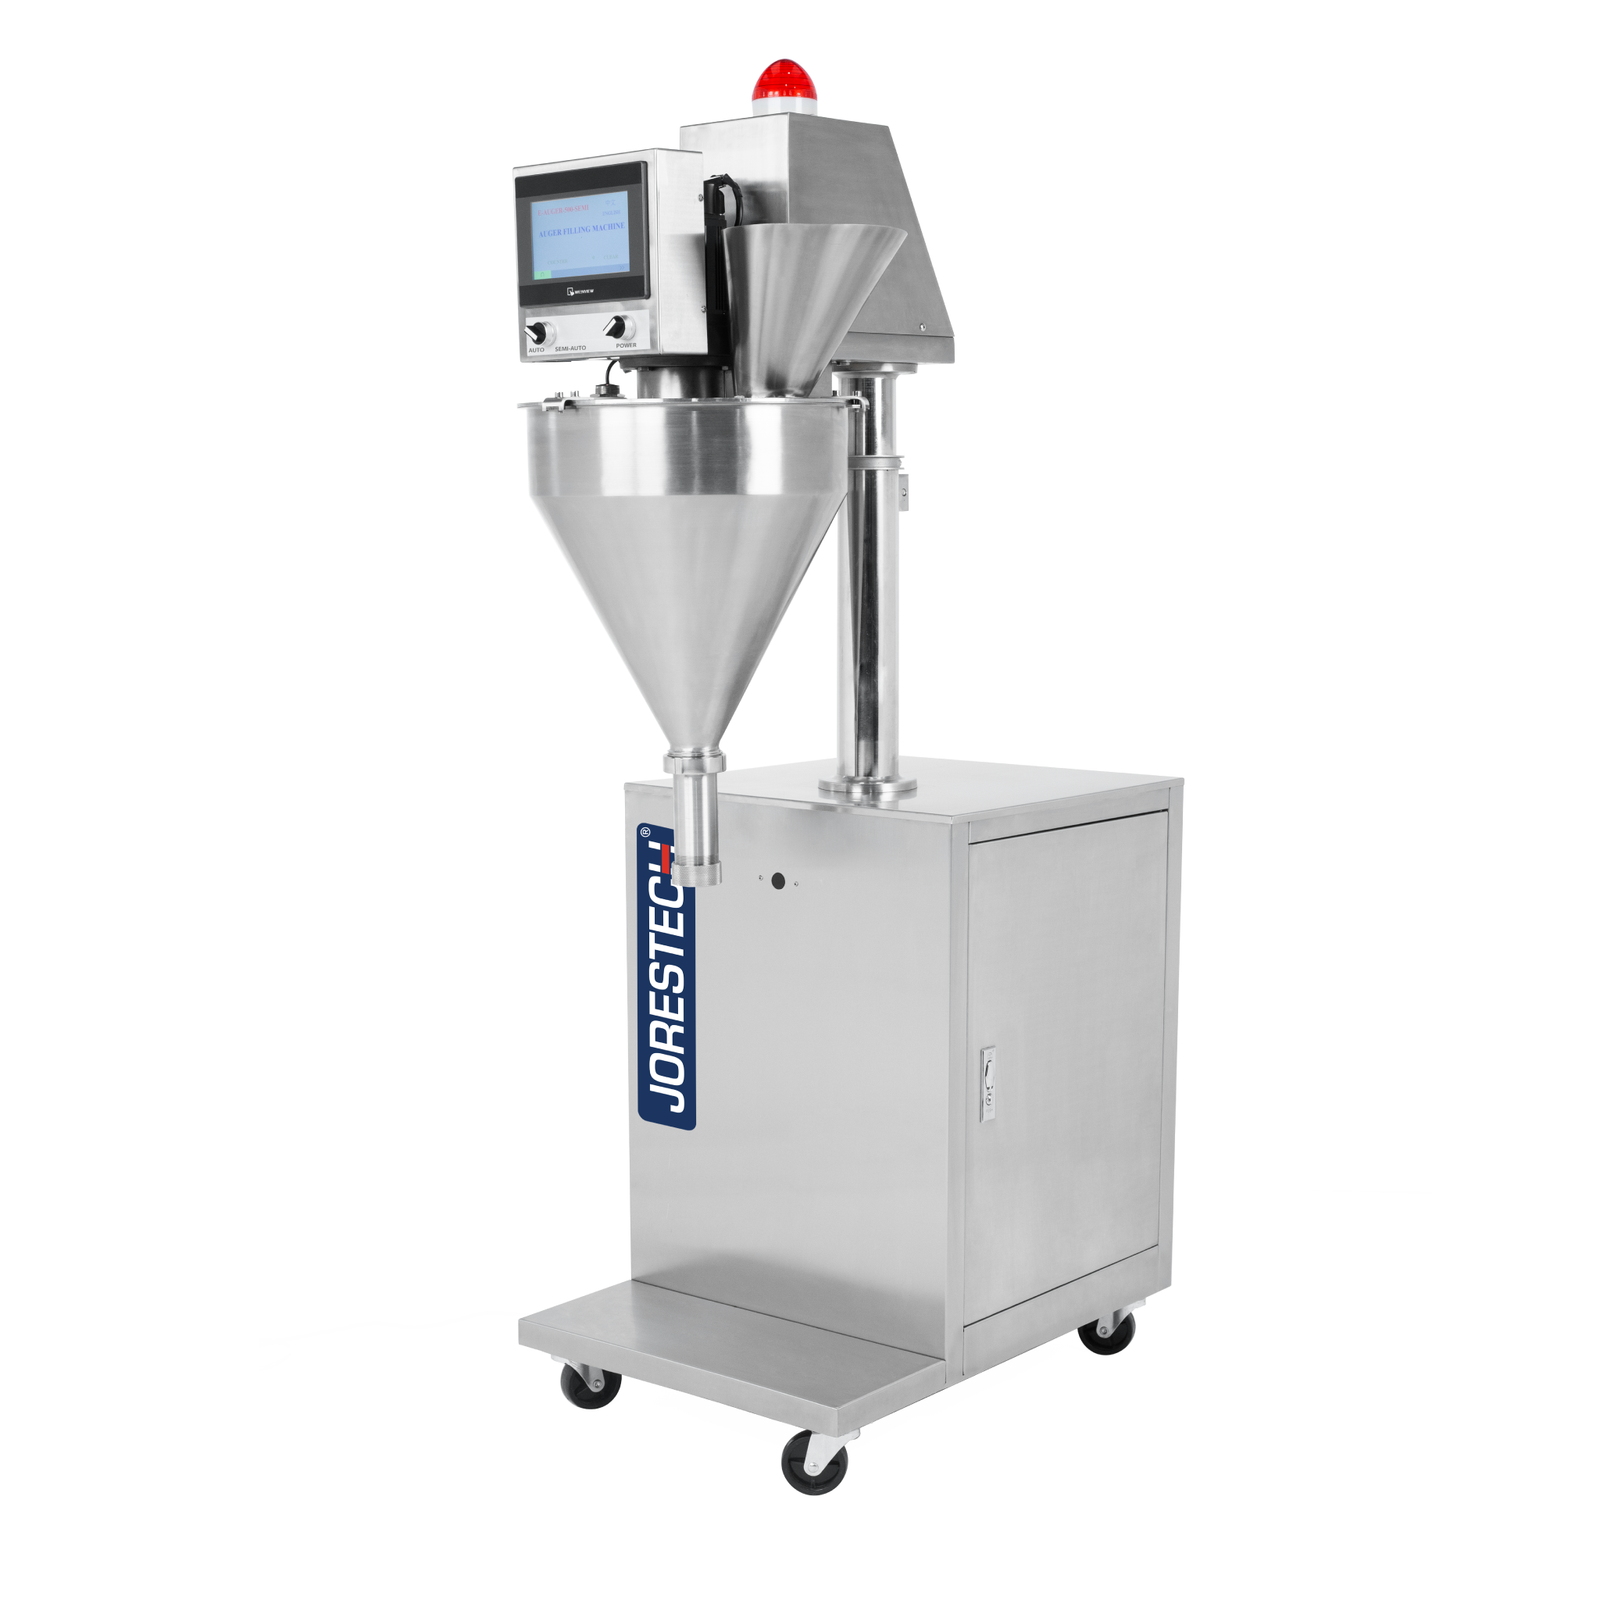 Auger-type stainless steel powder dispensing and filling machine by JORES TECHNOLOGIES®